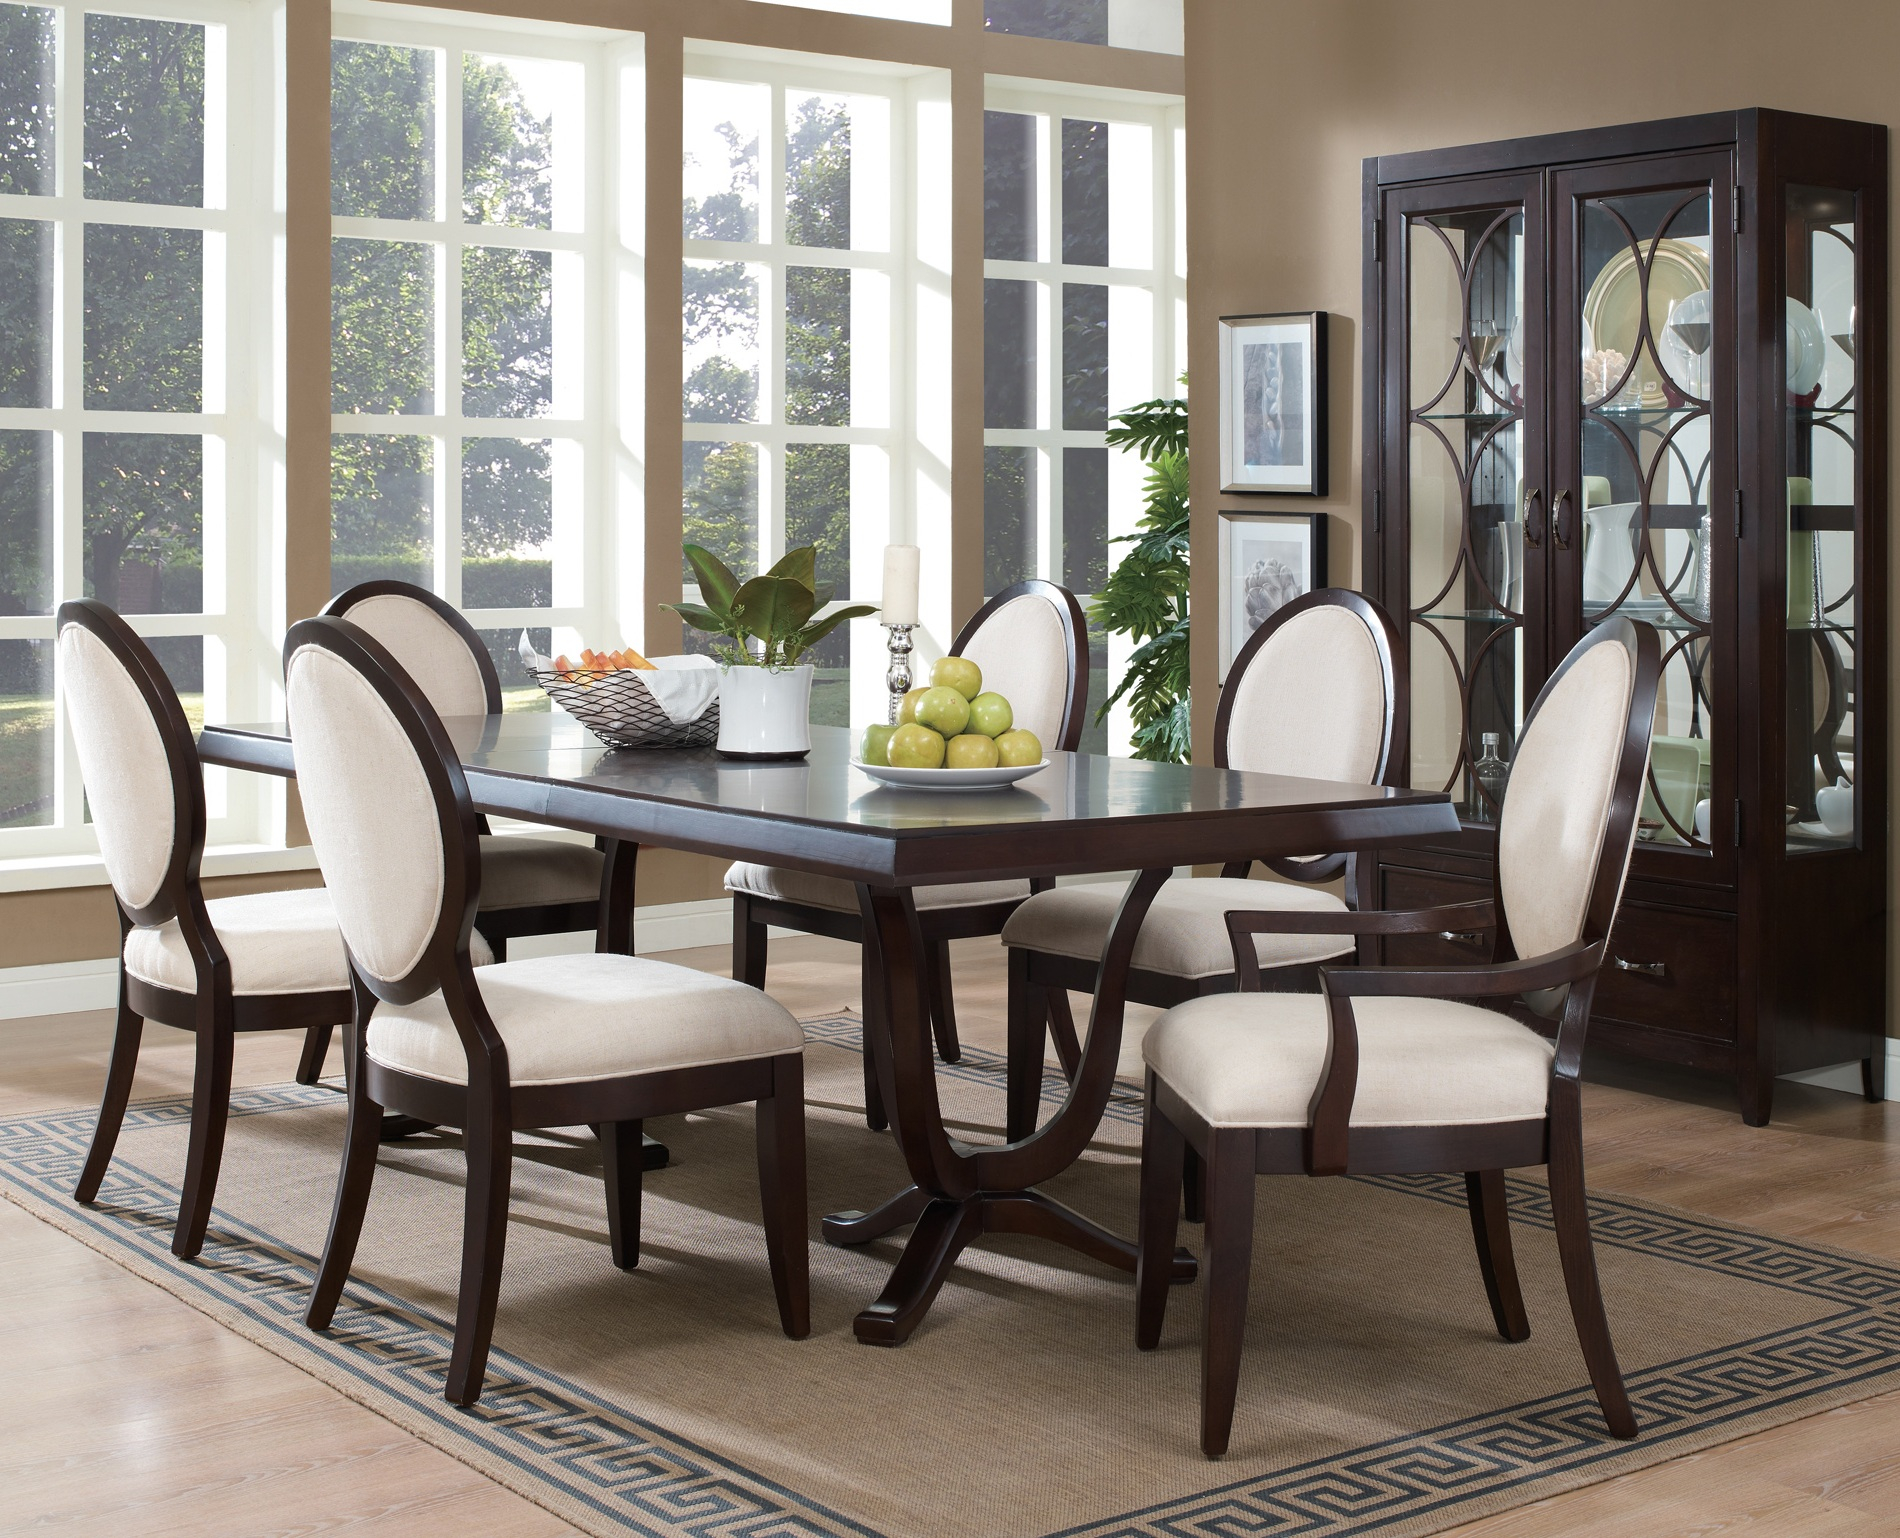 Dining Room Sets In South Africa